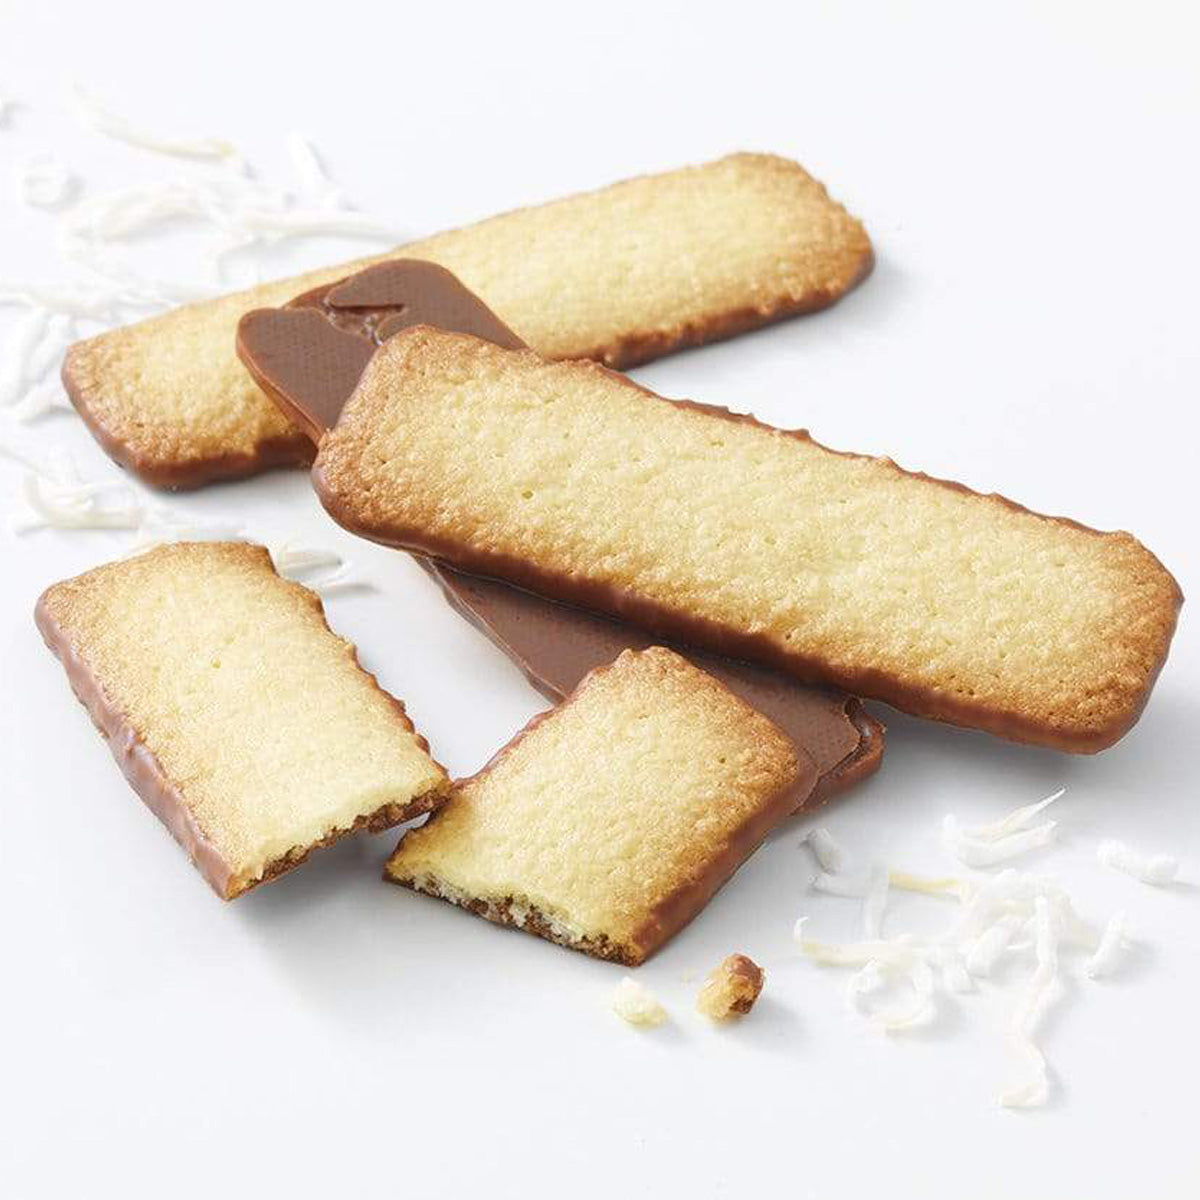 ROYCE' Chocolate - Baton Cookies "Coconut" - Image shows golden cookies with brown chocolate coating and white coconut shavings on a white-colored surface.